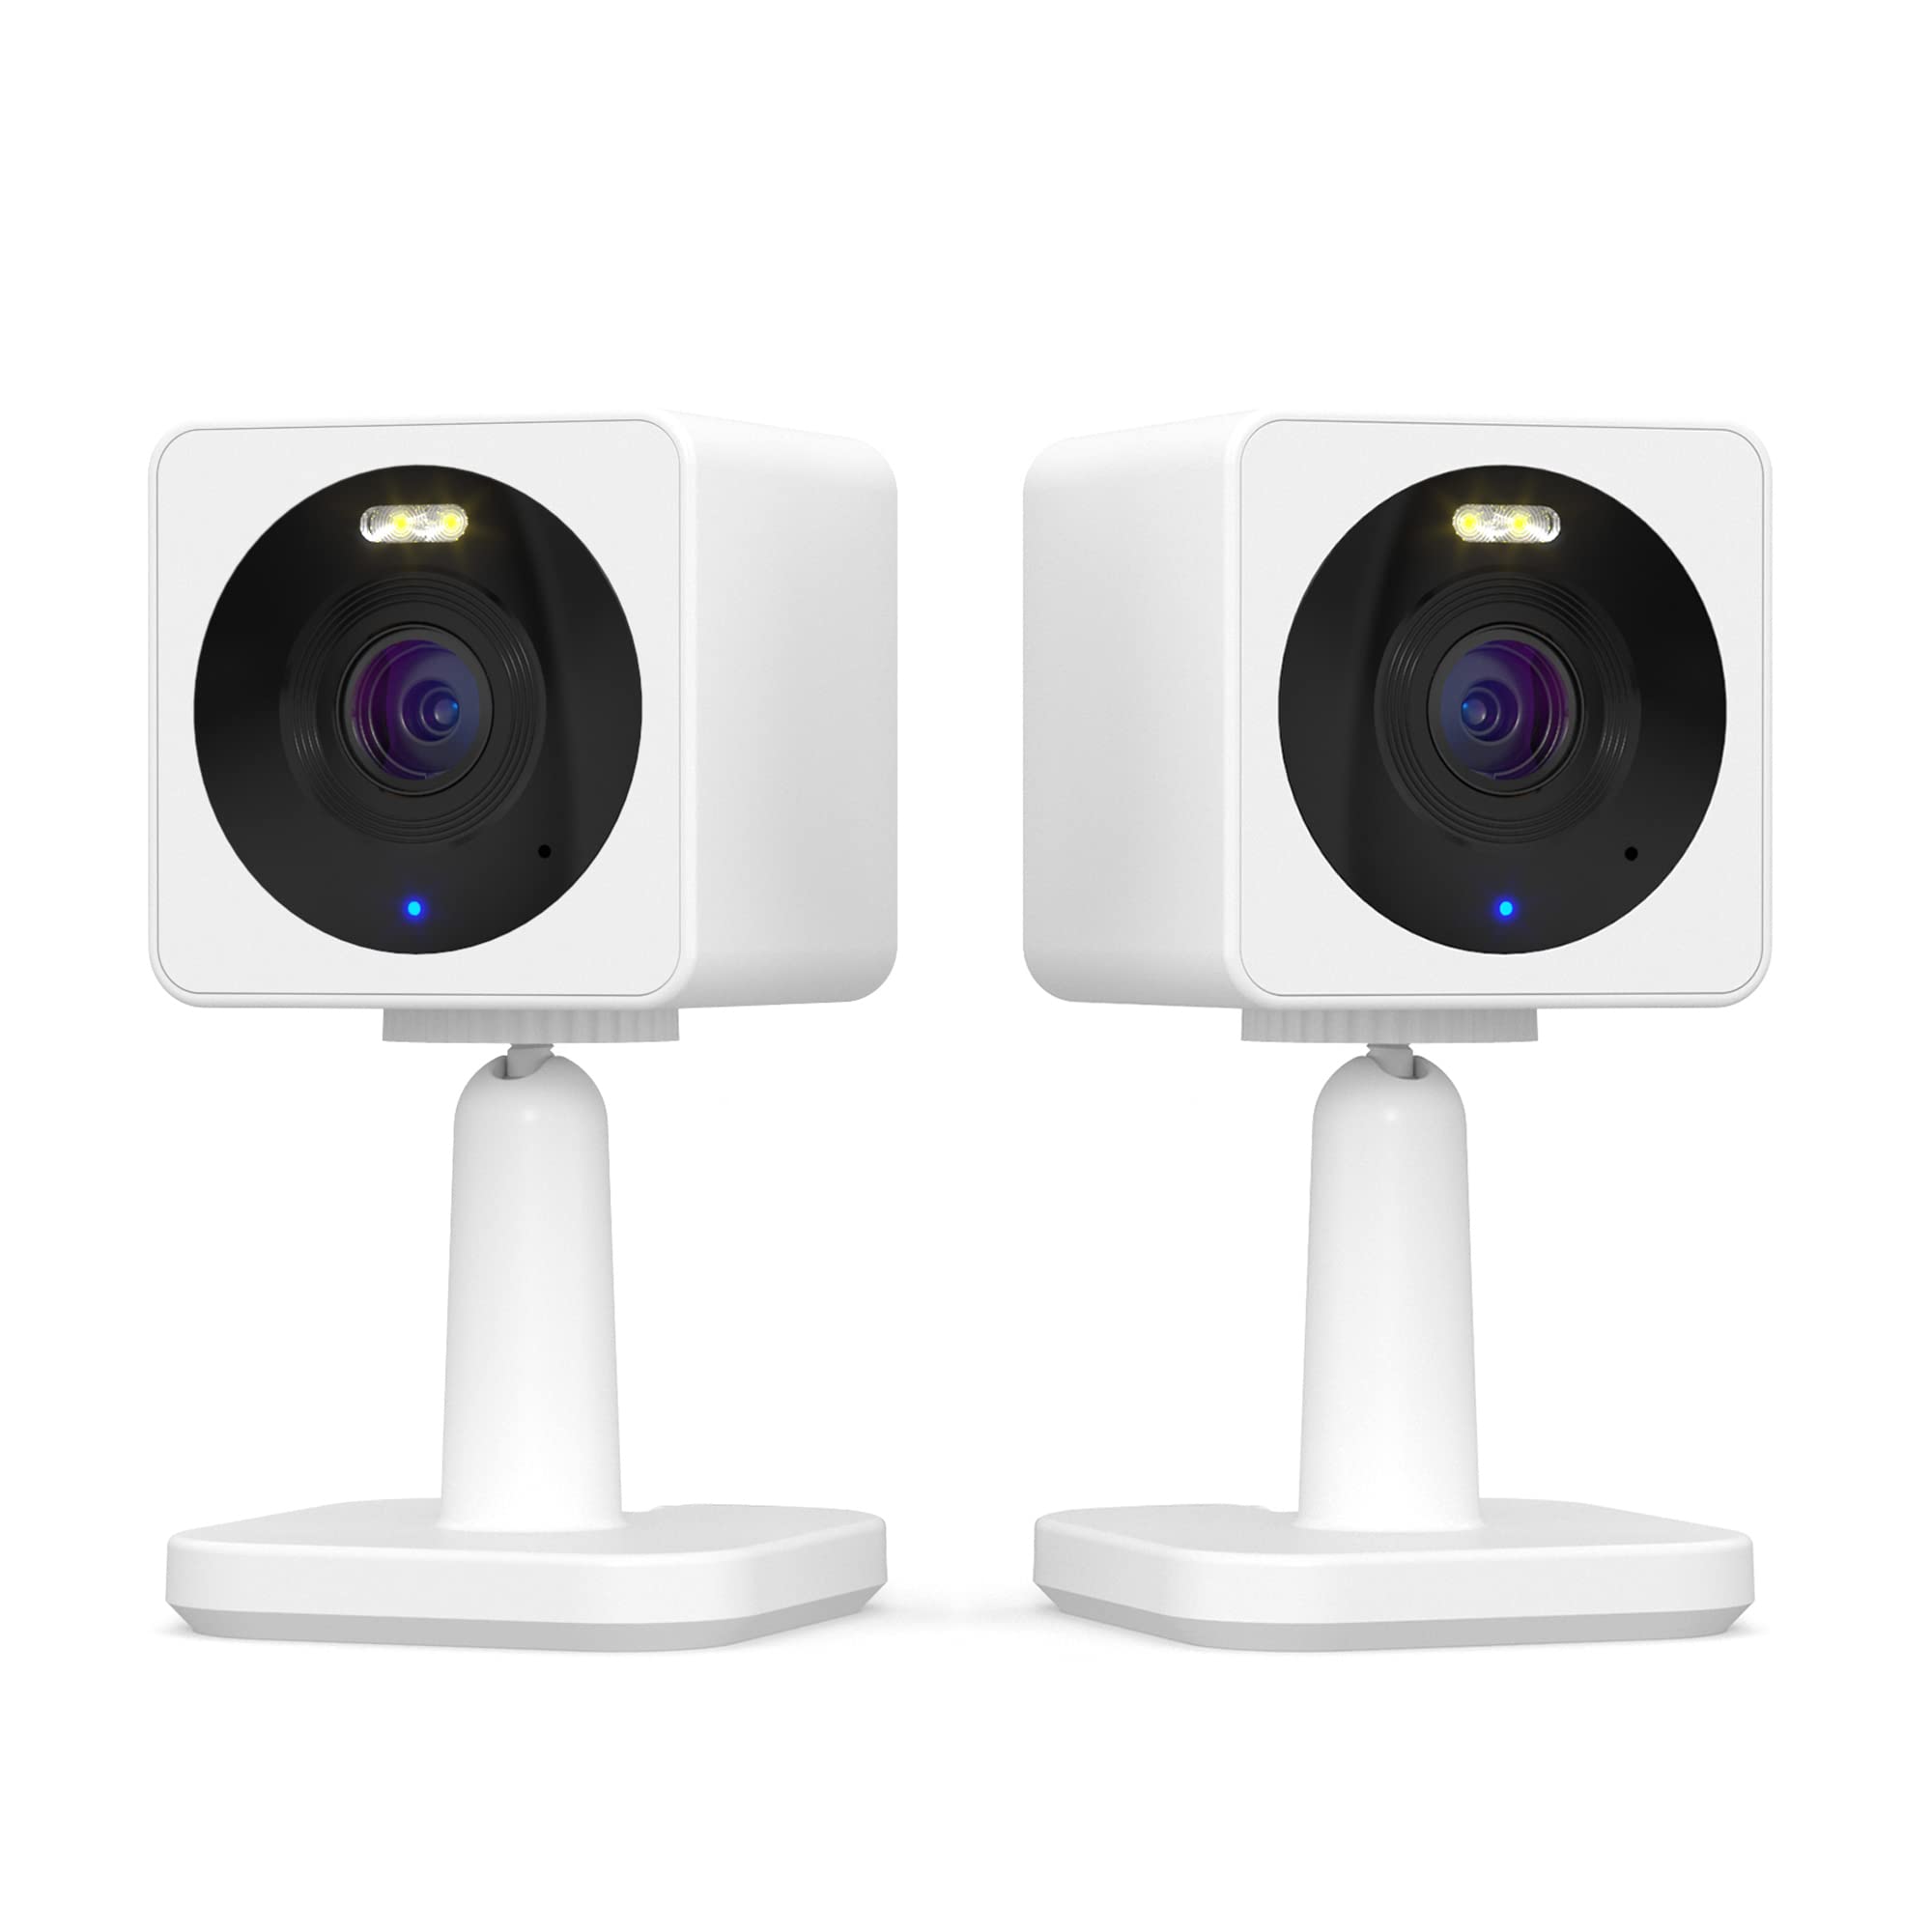 WYZE Cam OG – Color Night Vision, Built-in Spotlight, and Motion Detection for Enhanced Surveillance (Pack of 2)